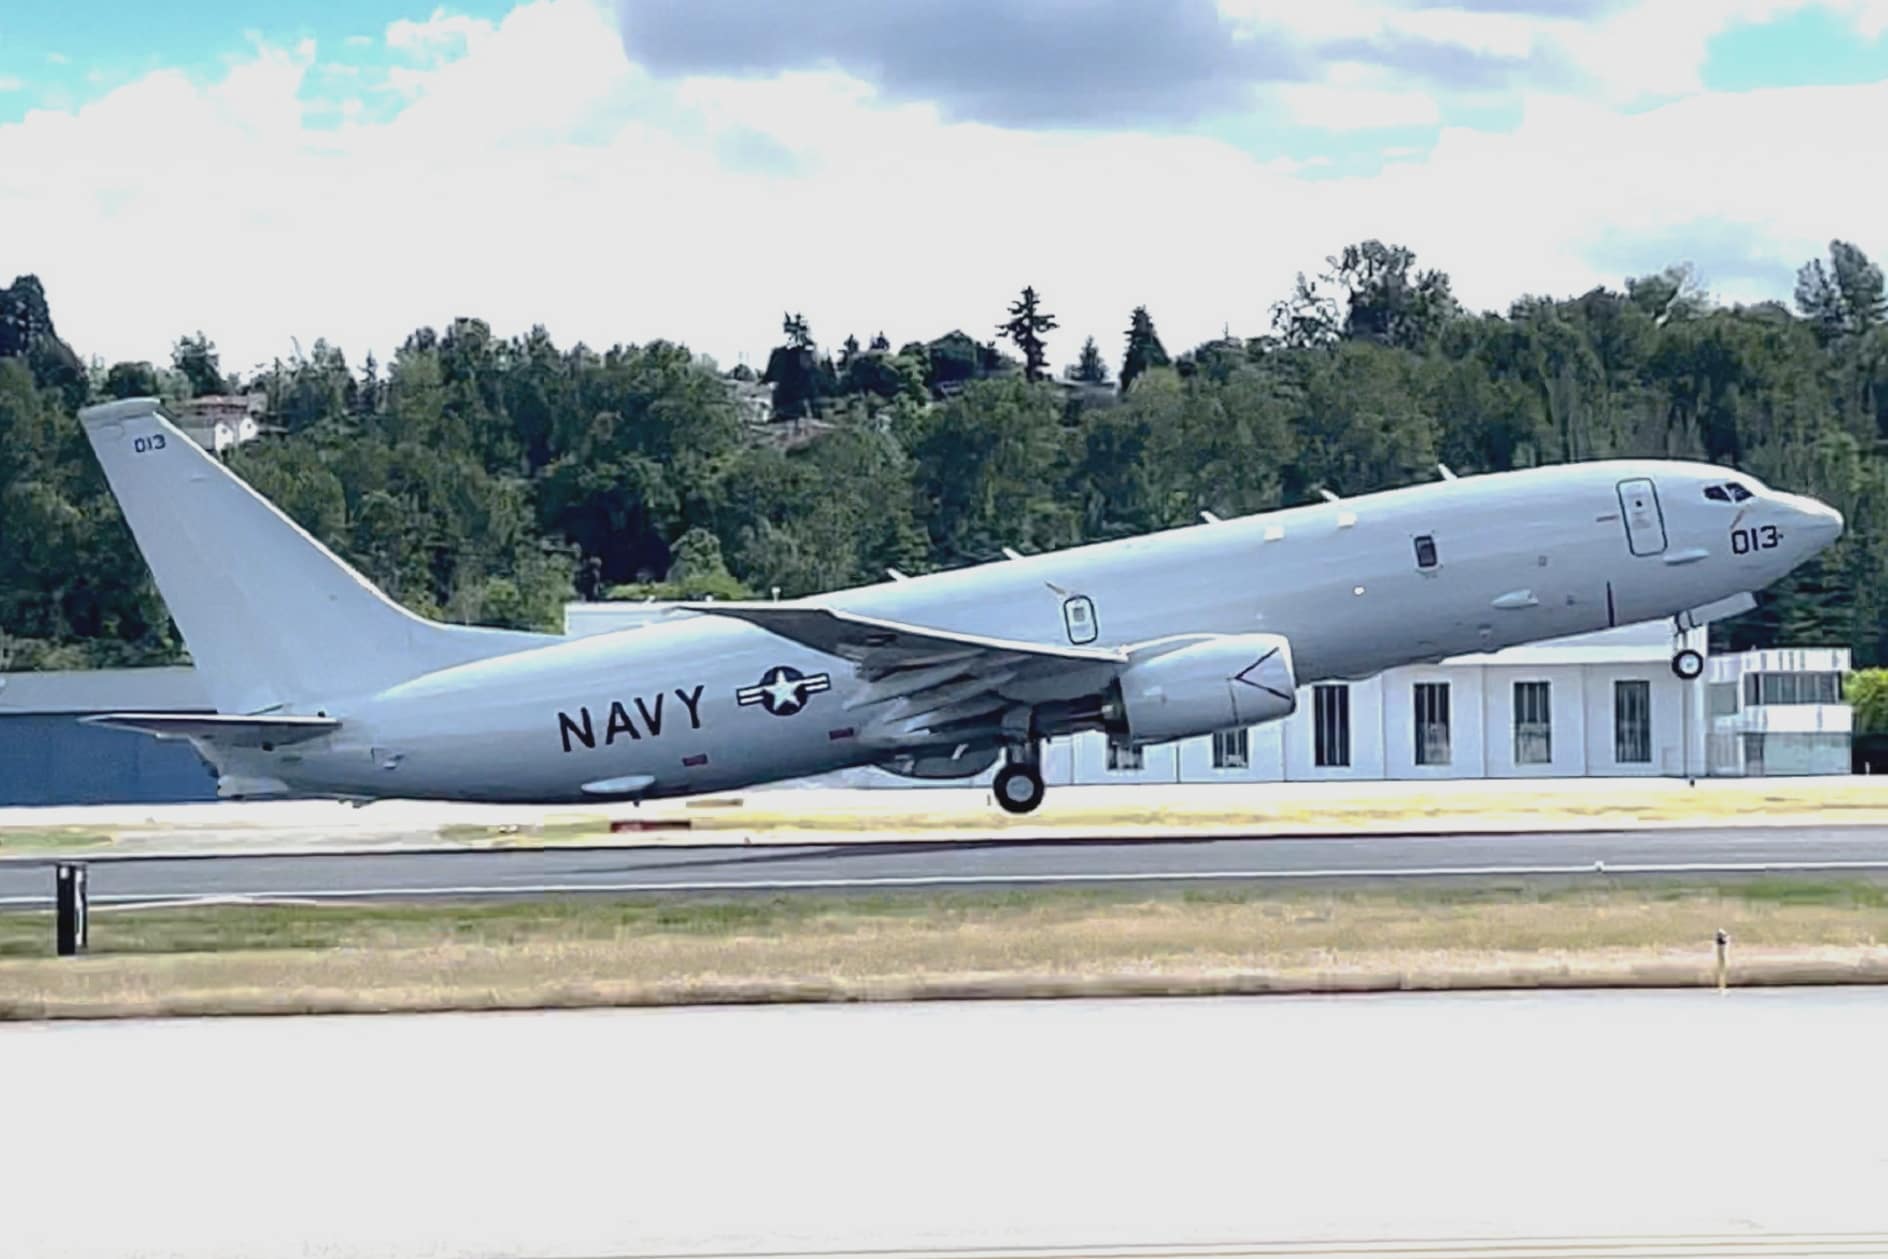 Boeing Delivers 150th P-8 Maritime Patrol Aircraft.